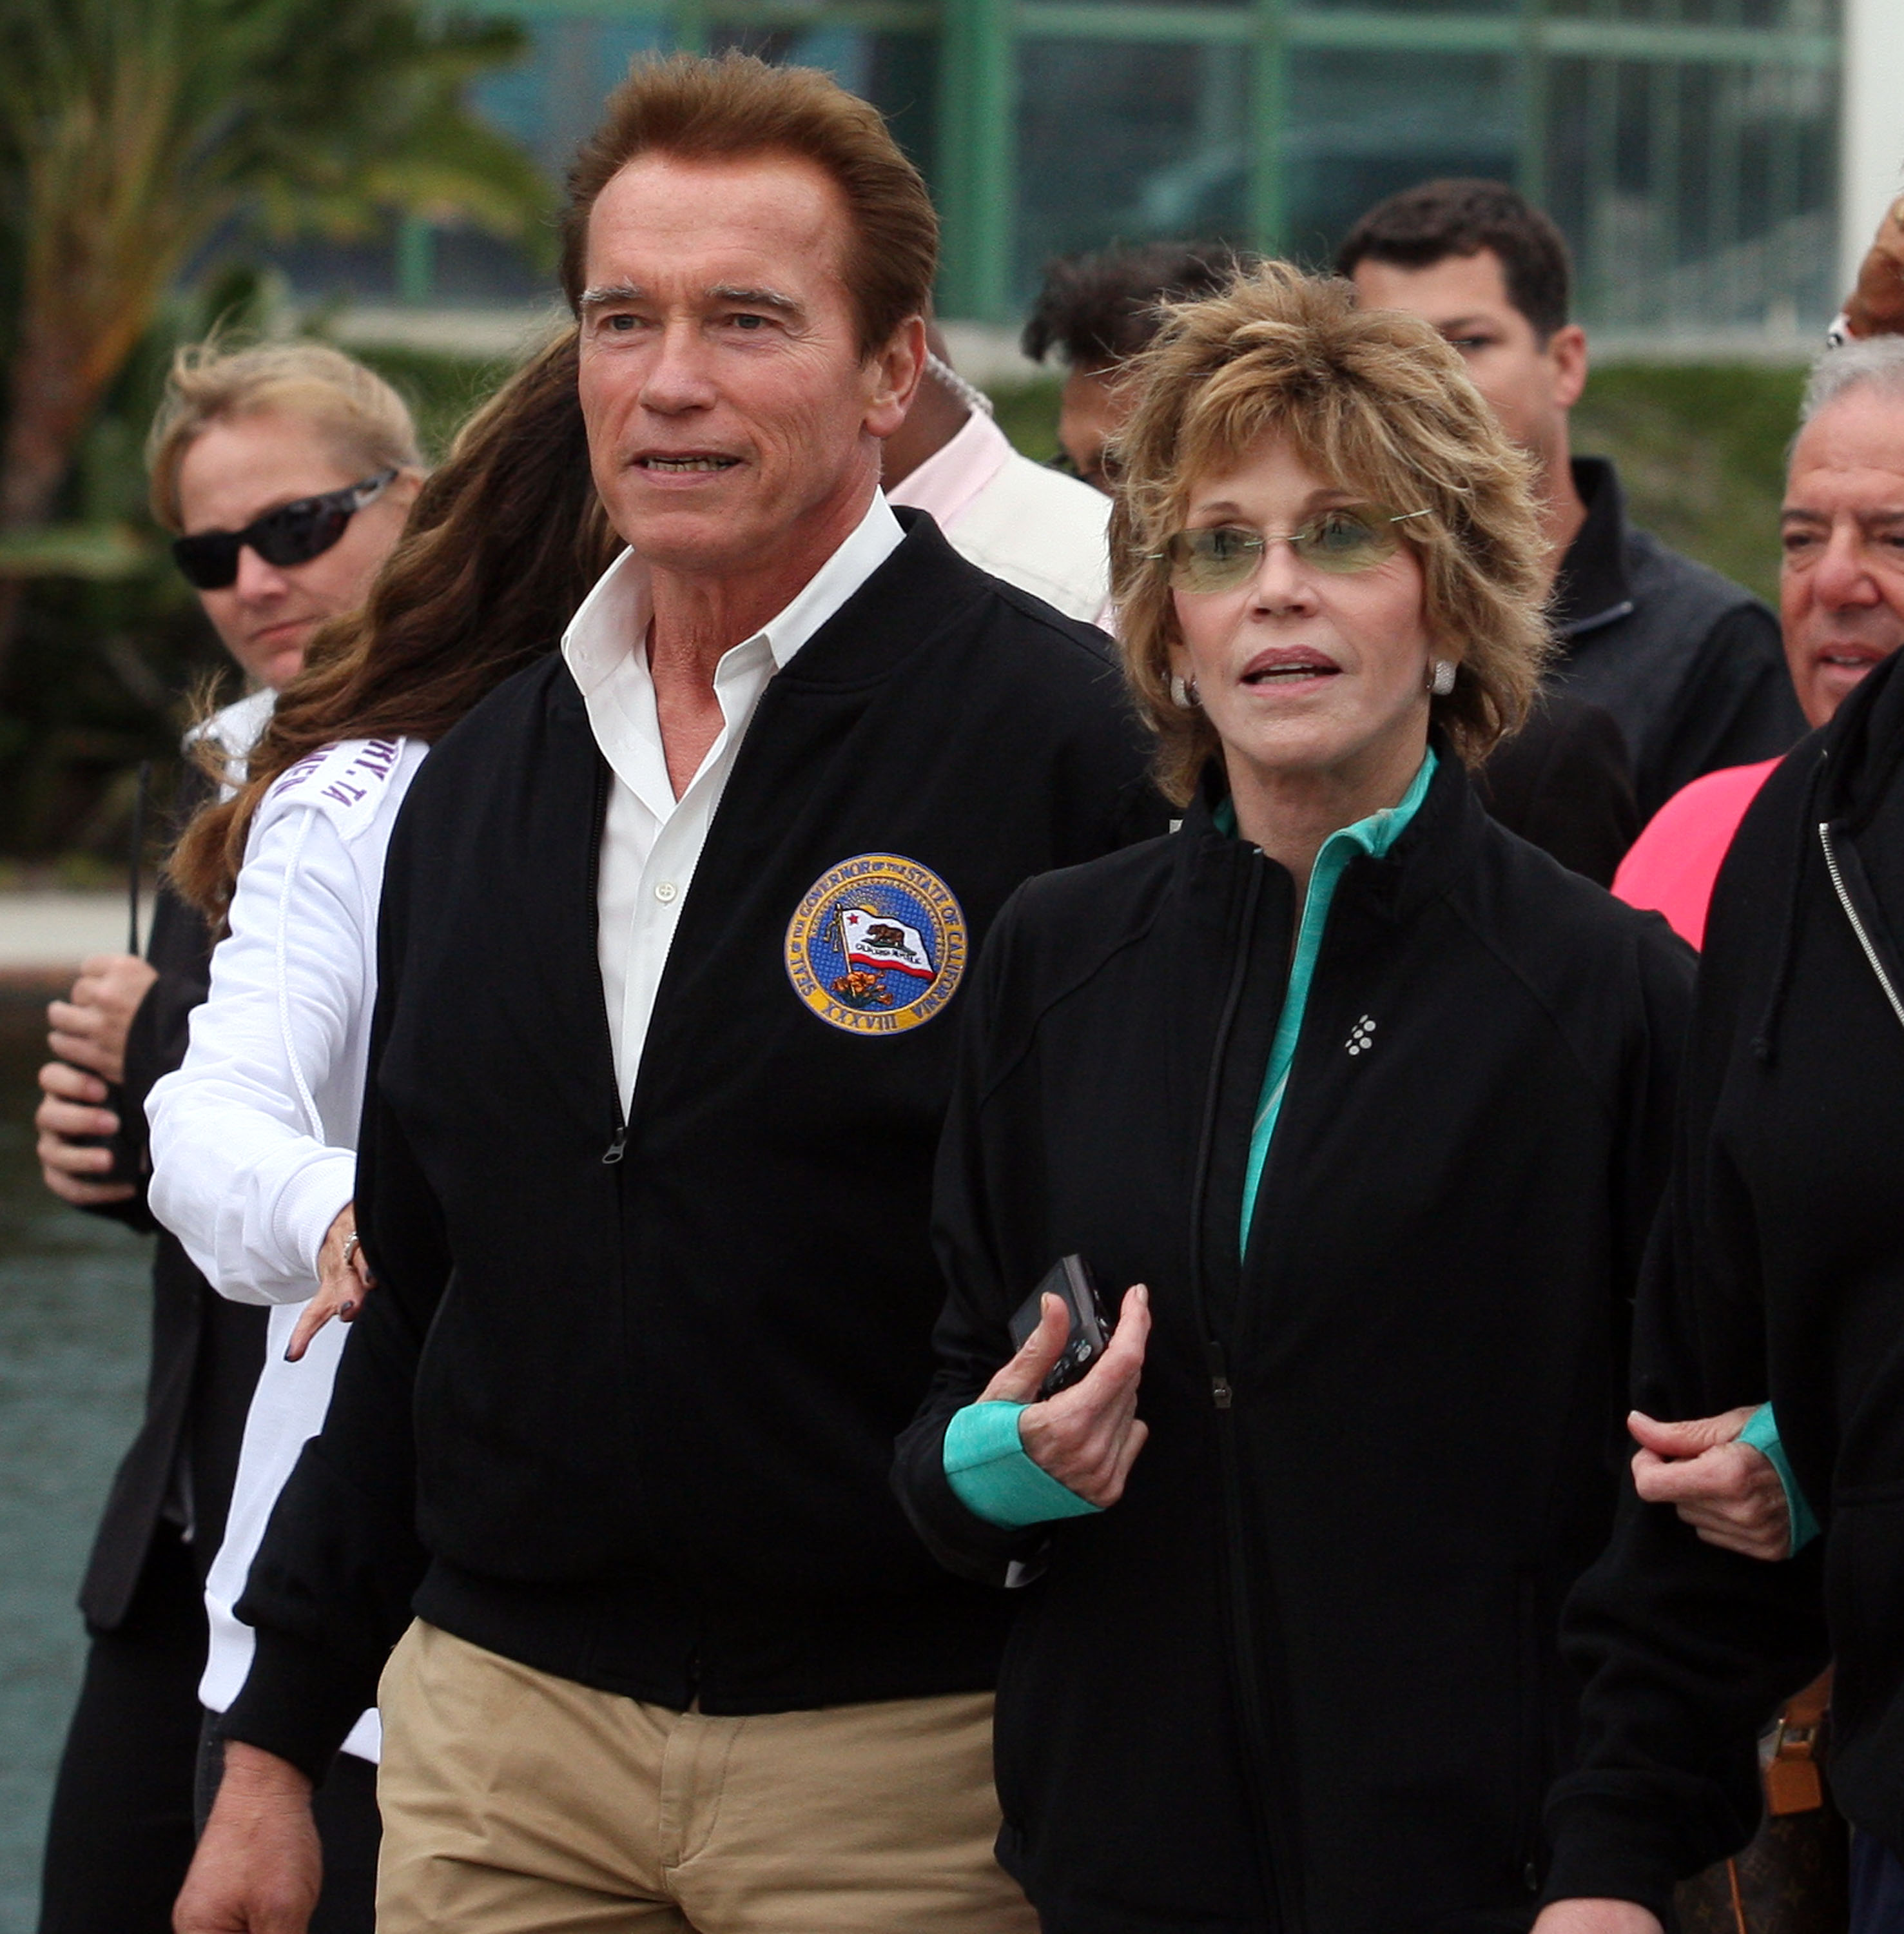 Arnold Schwarzenegger and actress Jane Fonda at the Long Beach Concention Center on October 24, 2010 in Long Beach, California | Source: Getty Images